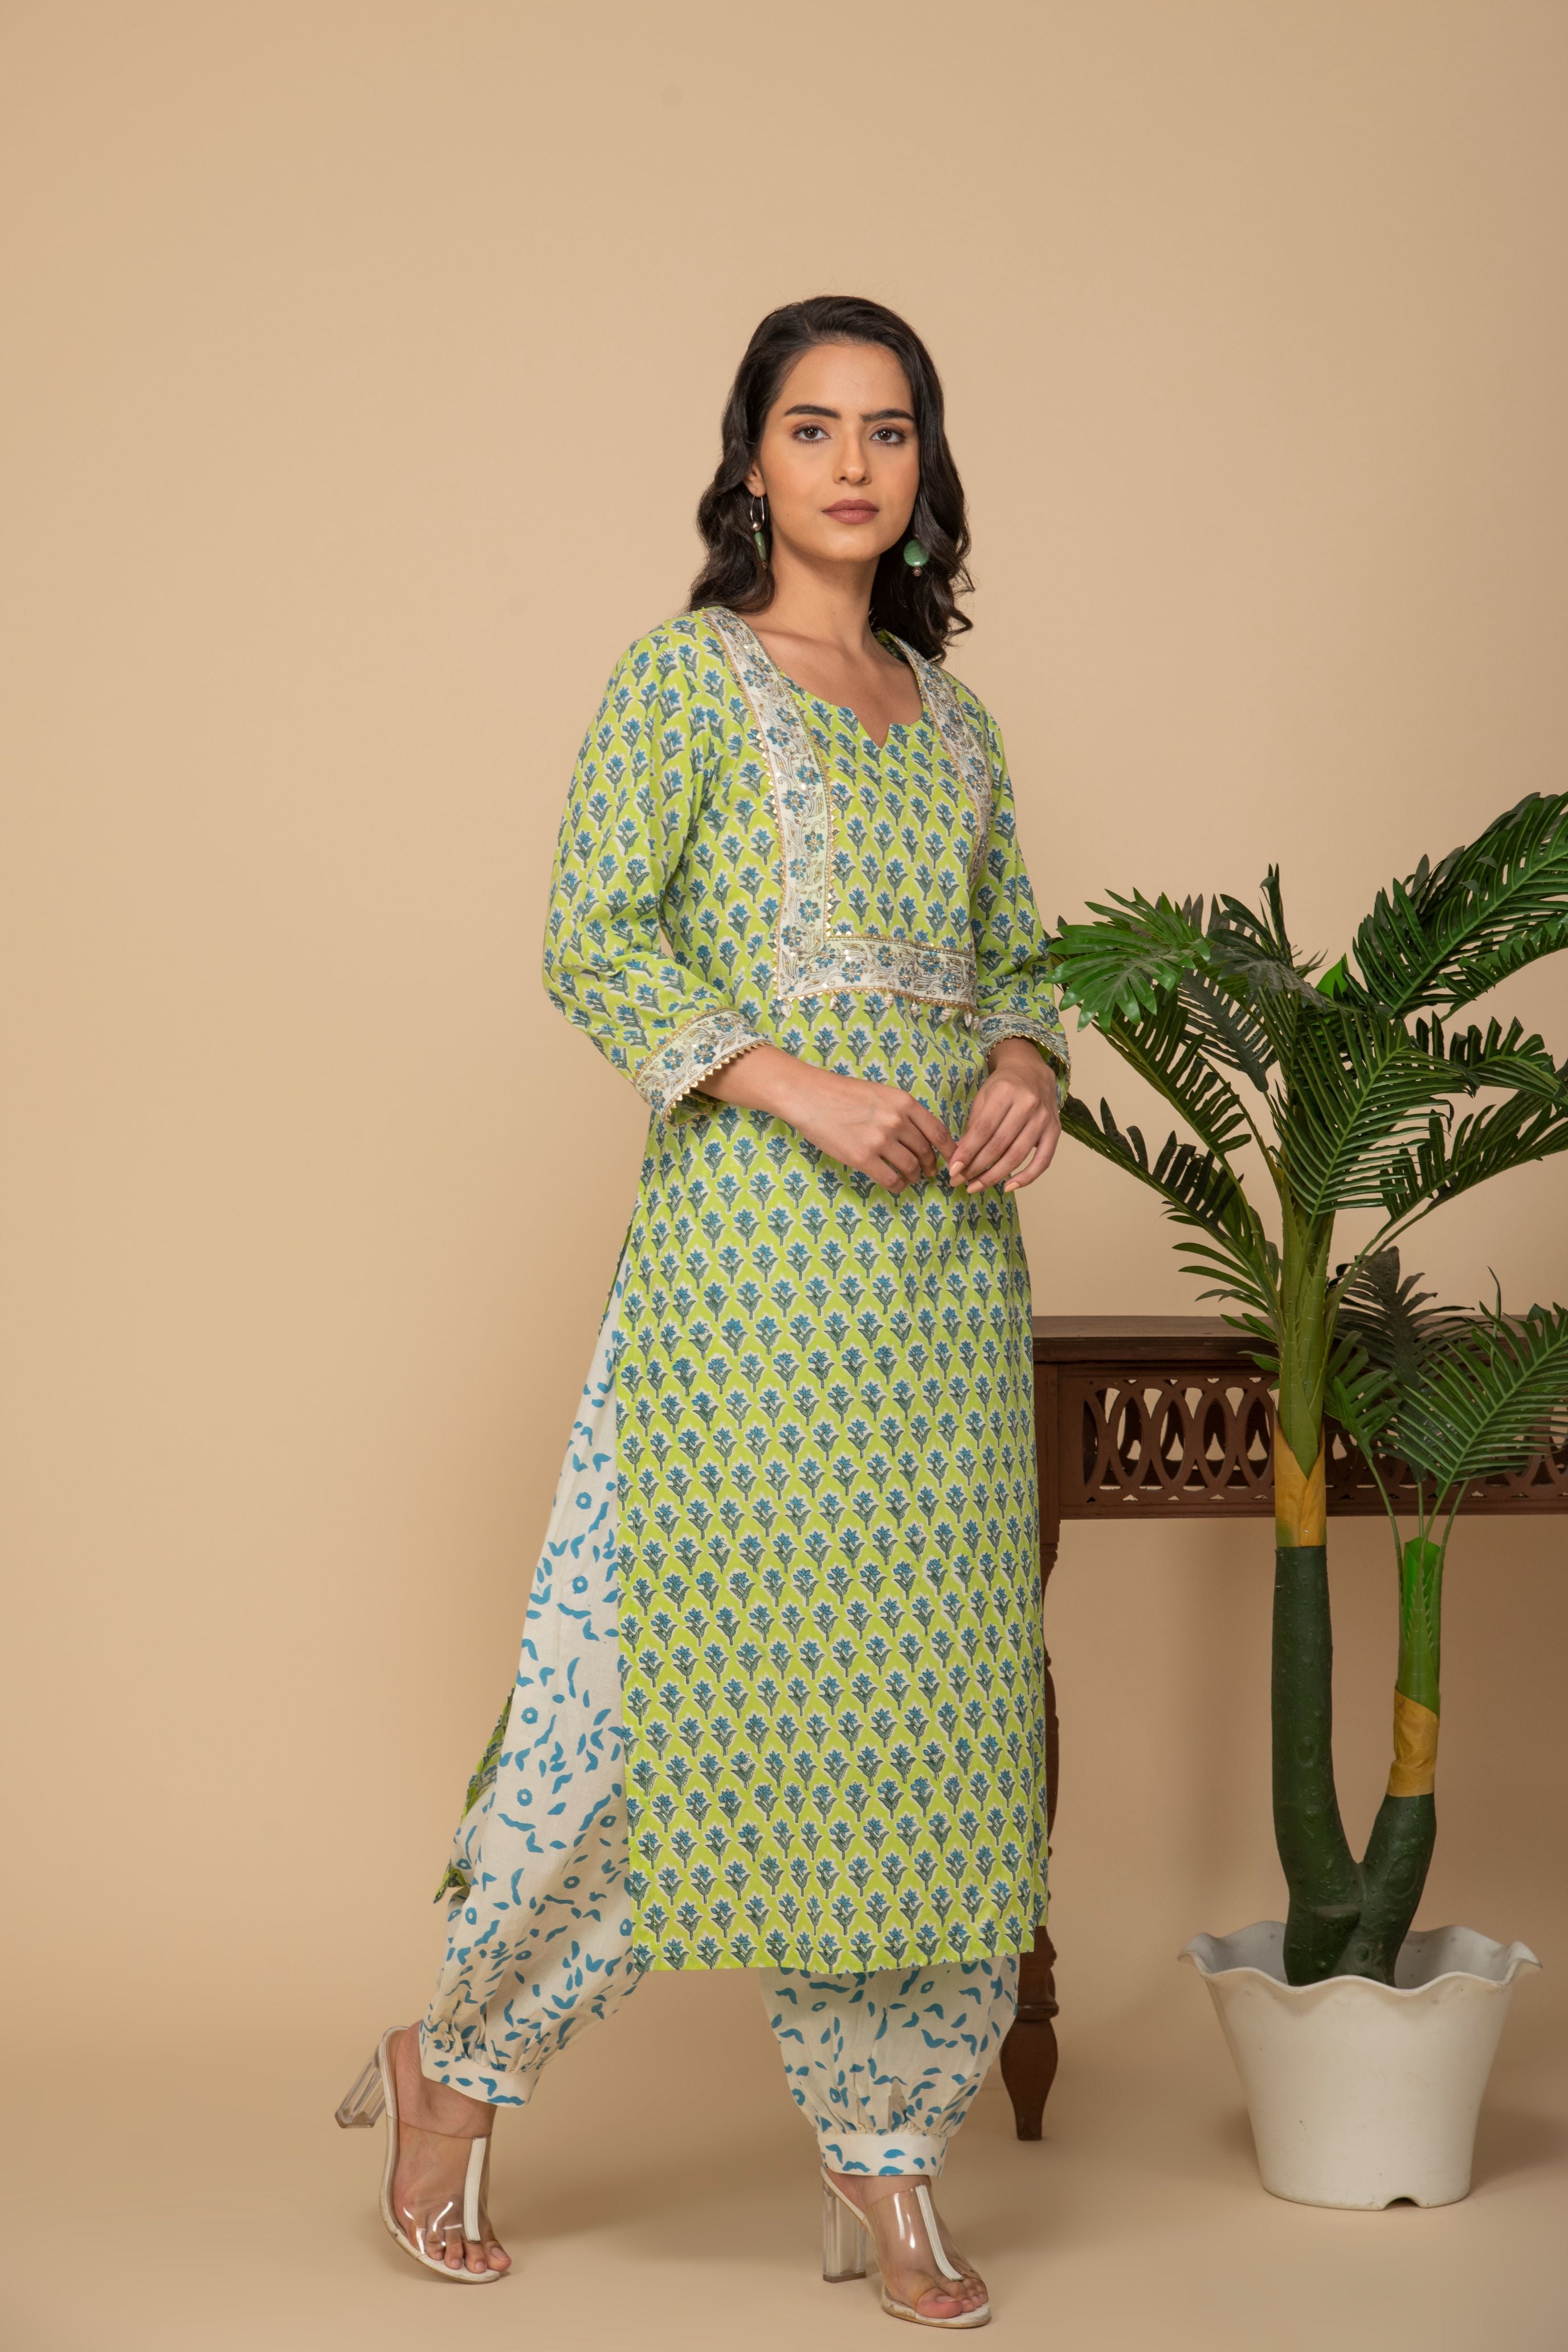 Green printed kurta with white printed bottom 3 piece suit set with contrast cream dupatta.